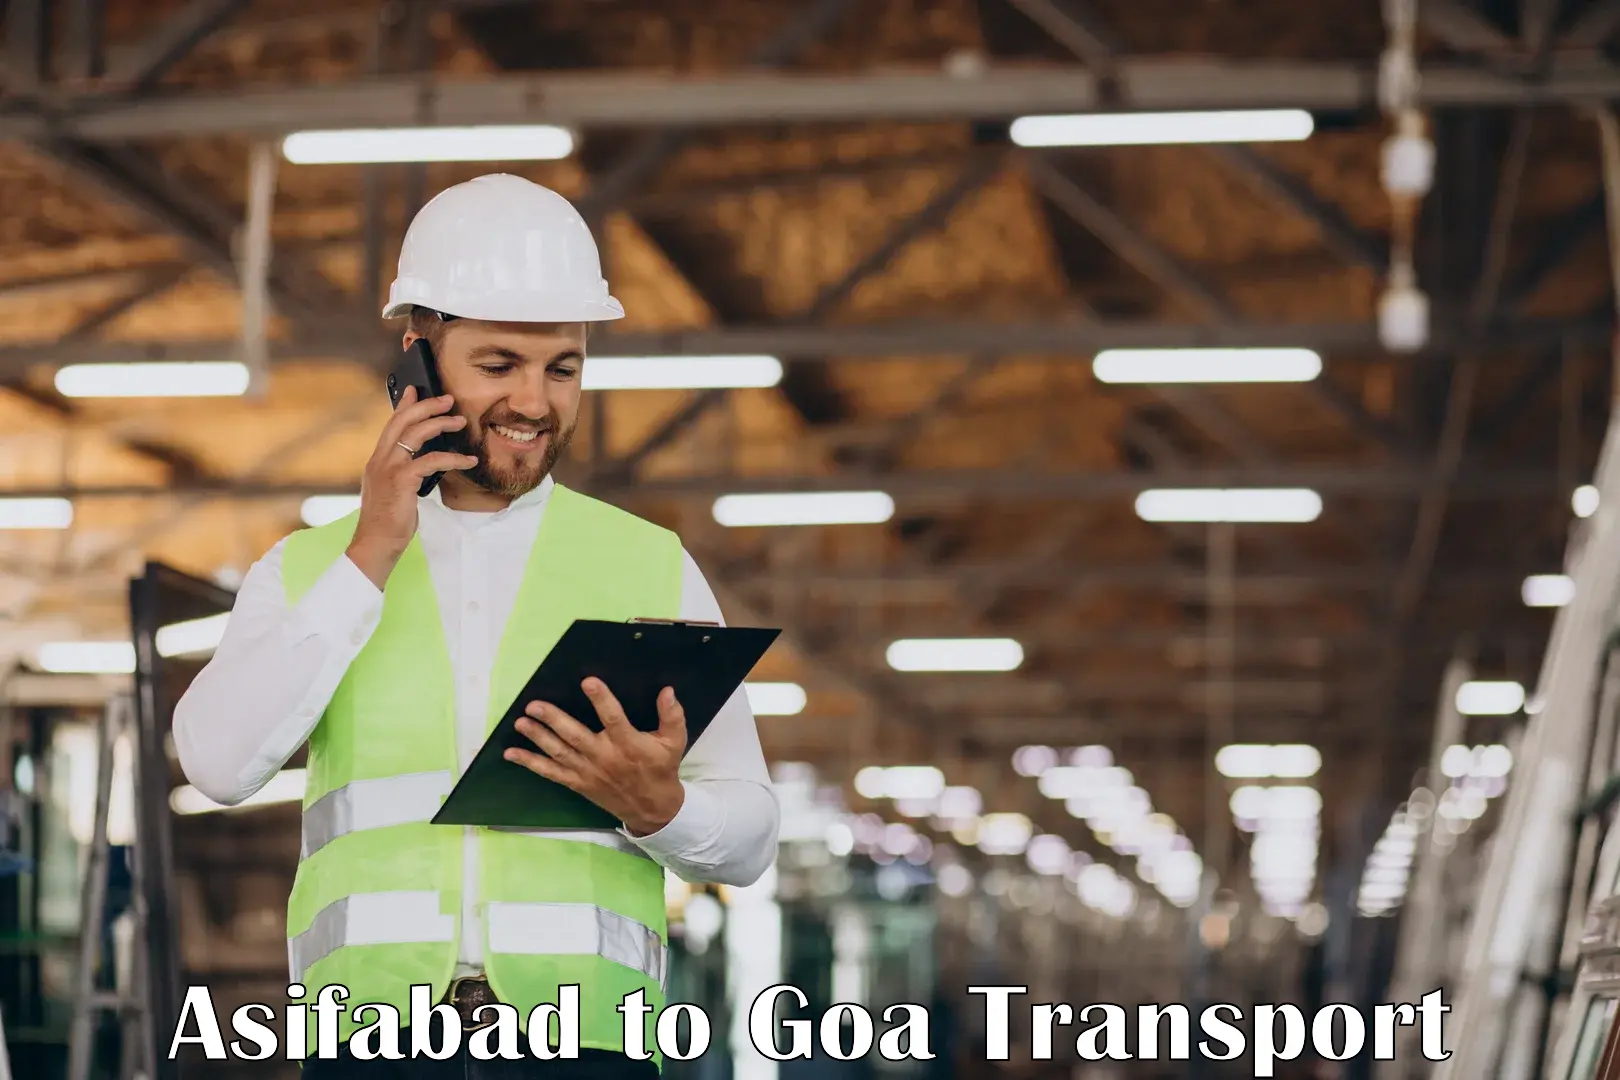 Online transport service Asifabad to Goa